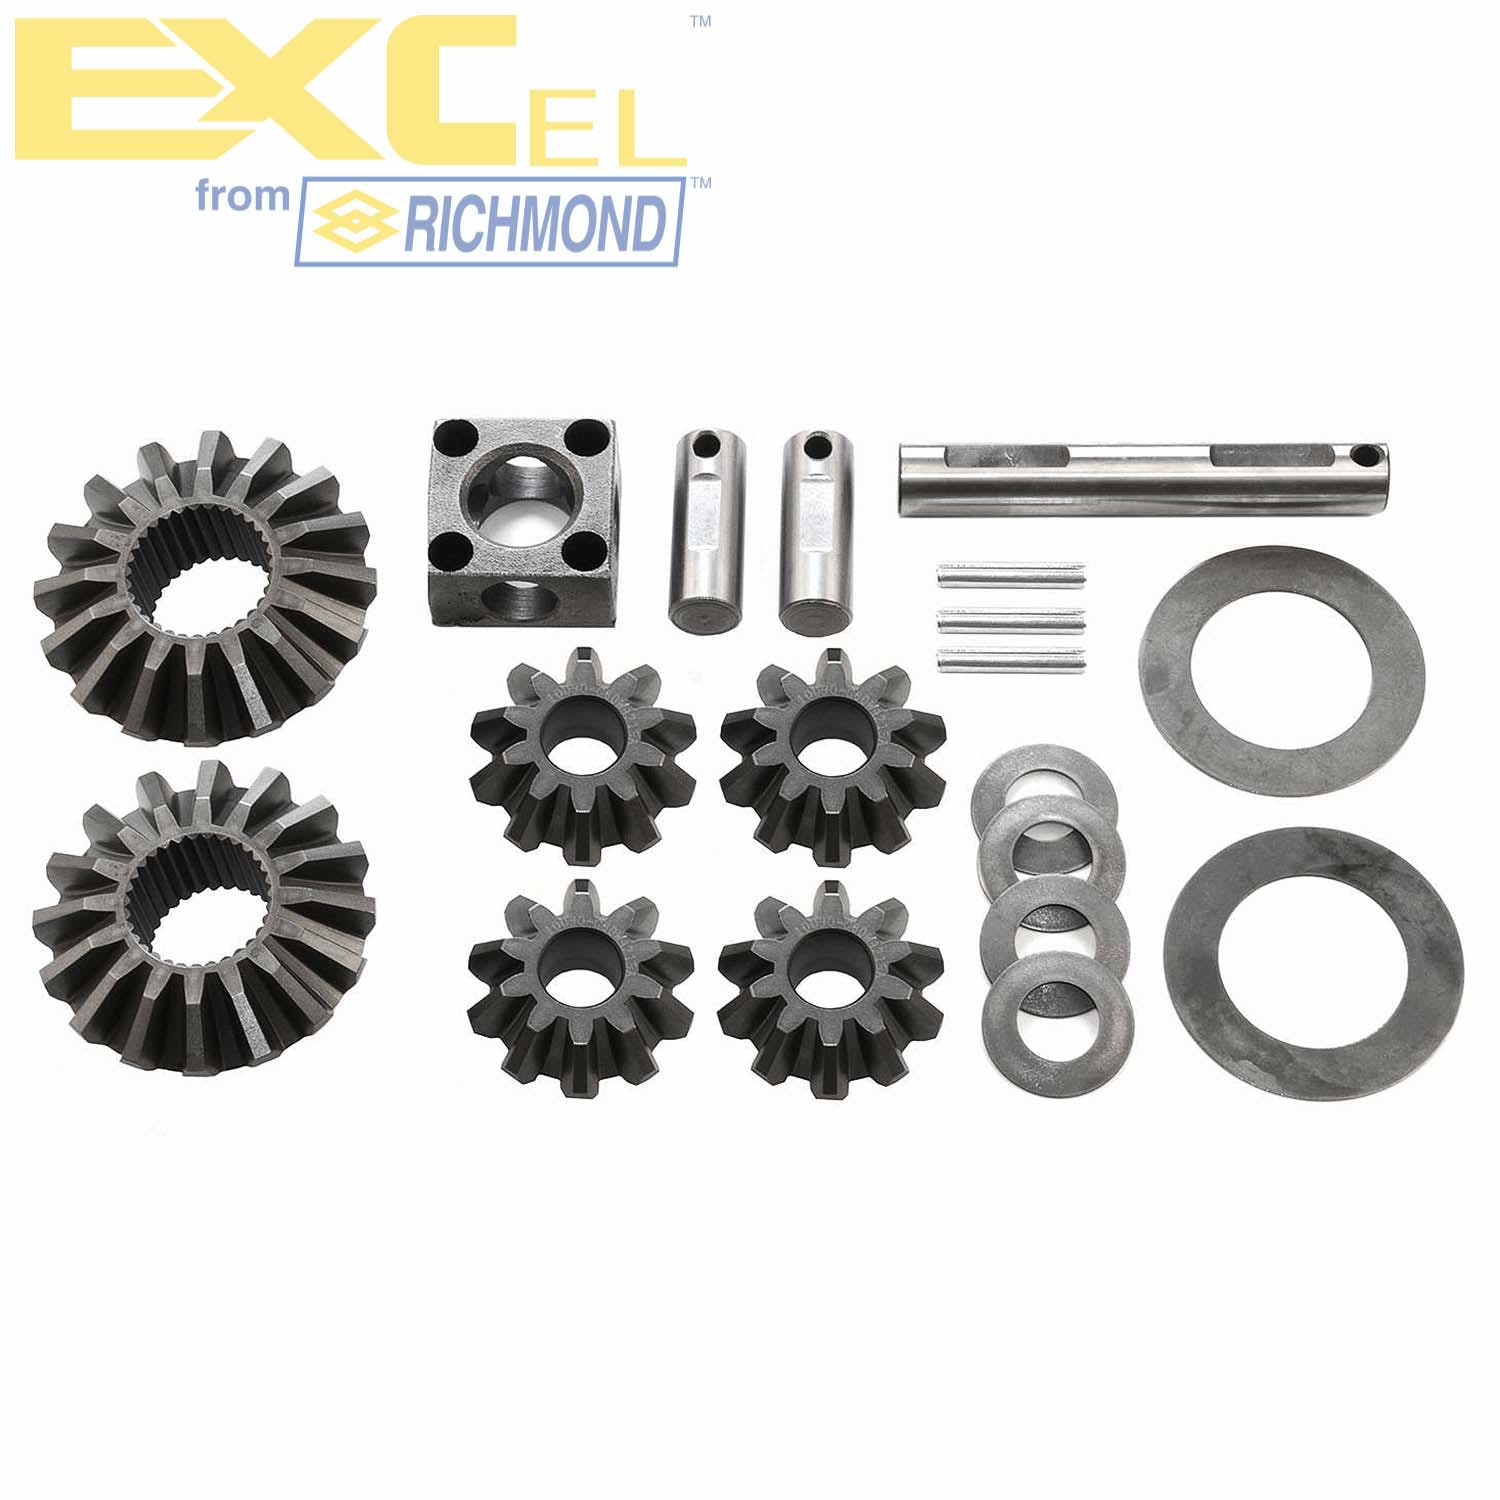 Excel XL-4020 Differential Carrier Gear Kit